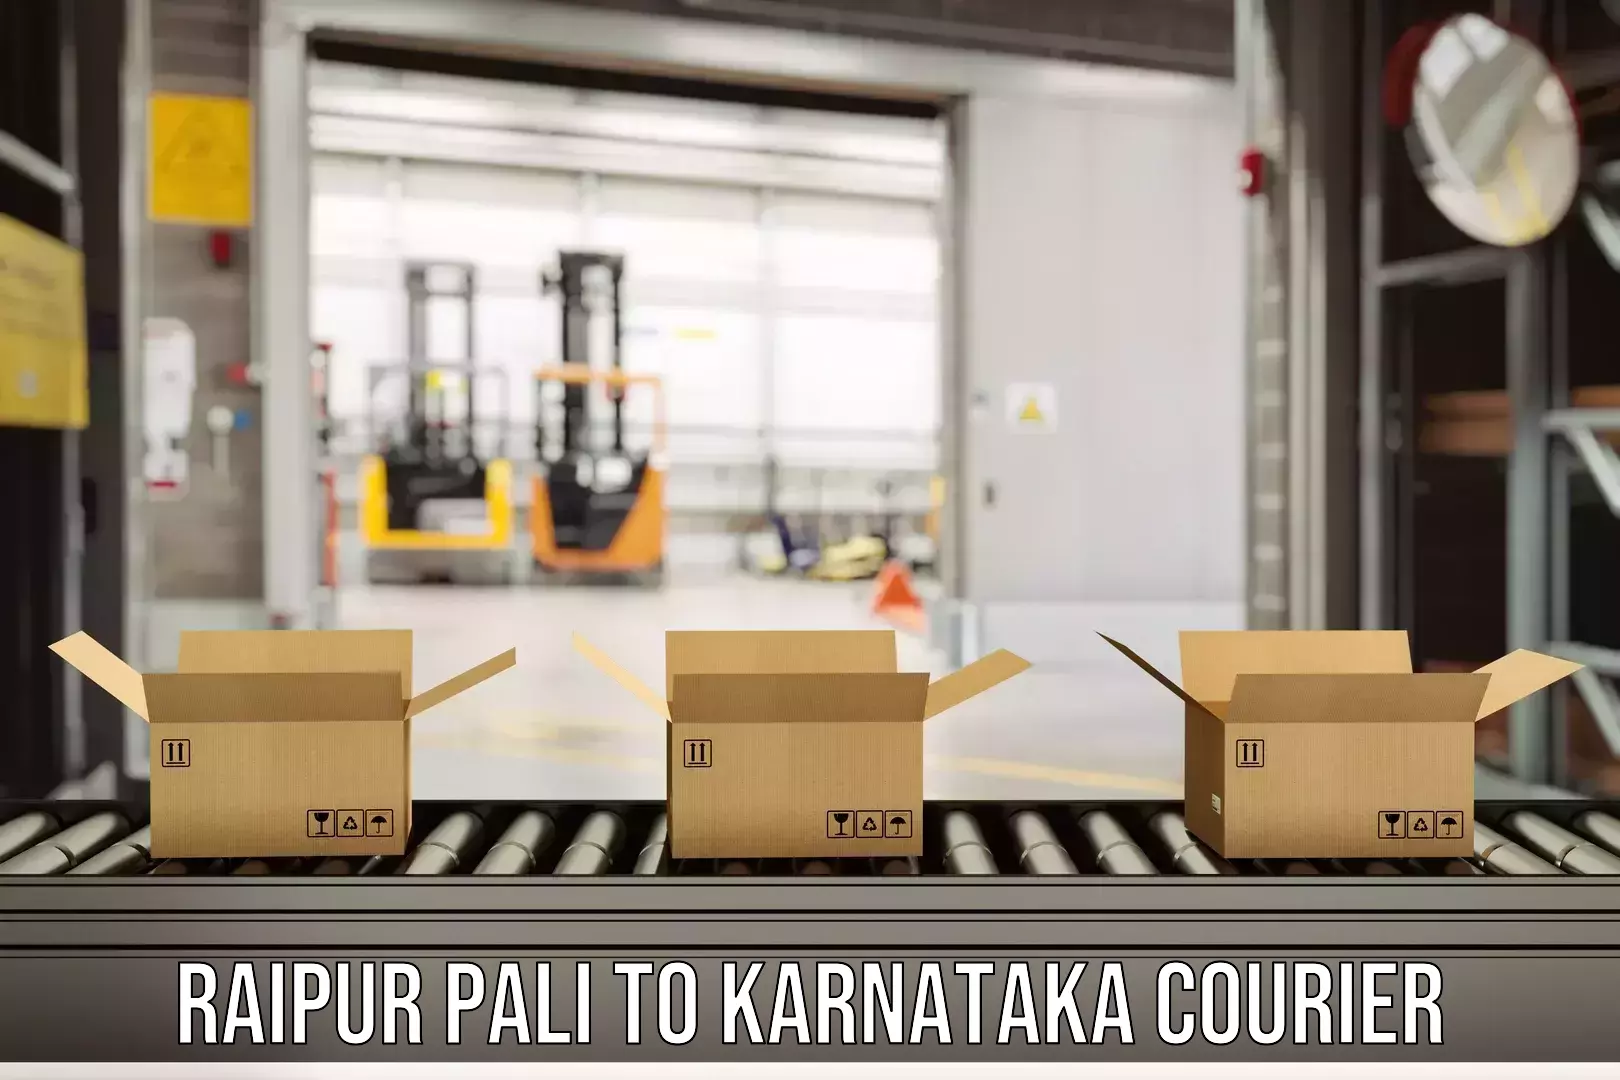 Full-service courier options Raipur Pali to Kollegal